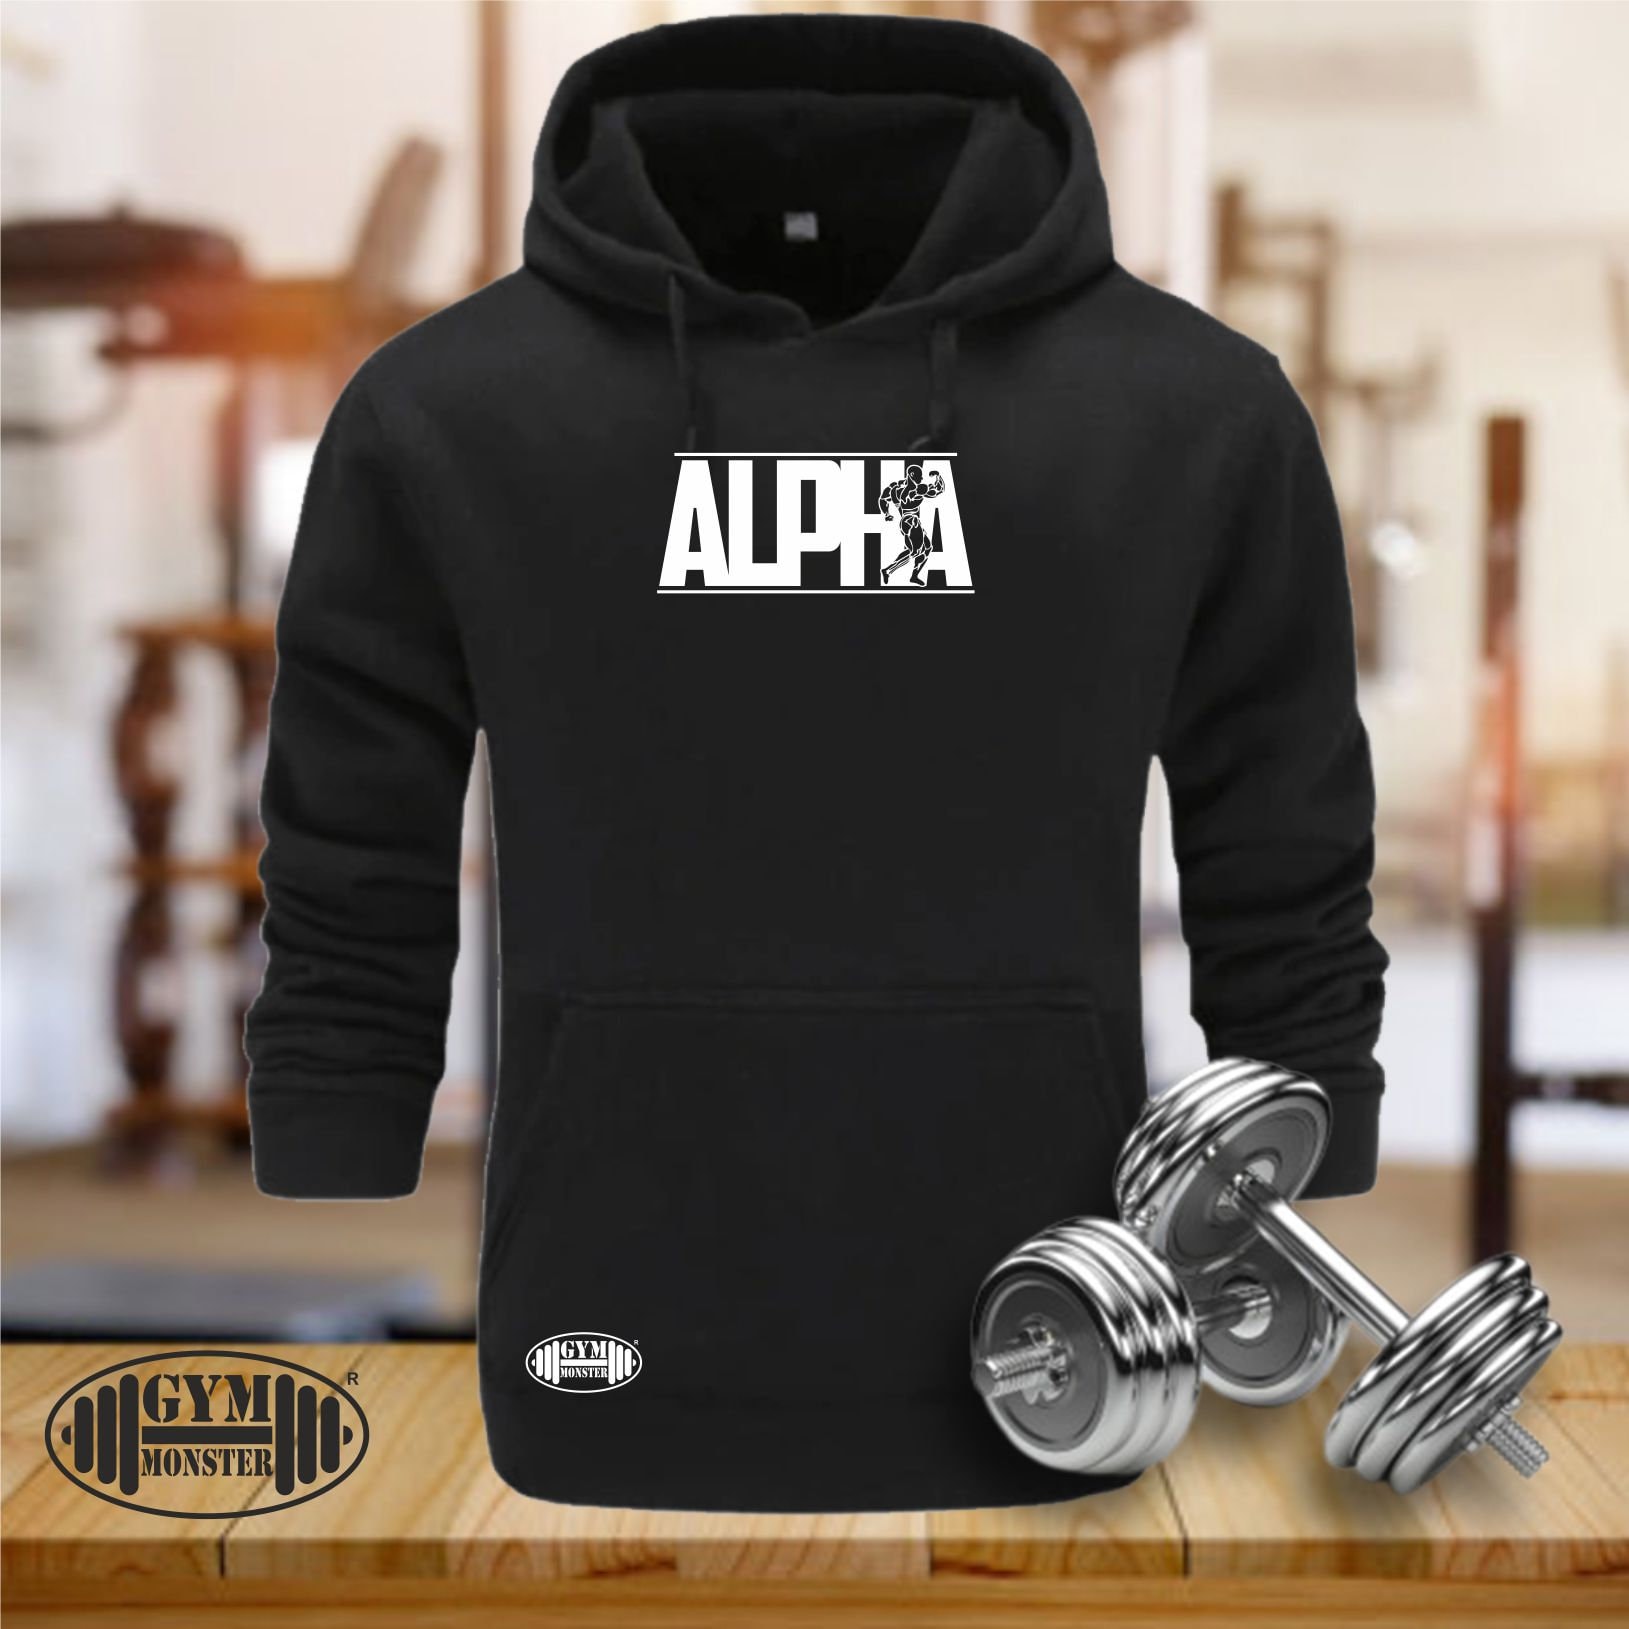 - Men Fitness Alpha Workout Training Gym Arts Etsy Norway Hoodie Sweatshirt Bodybuilding Kick Exercise Top MMA Martial Boxing Clothing